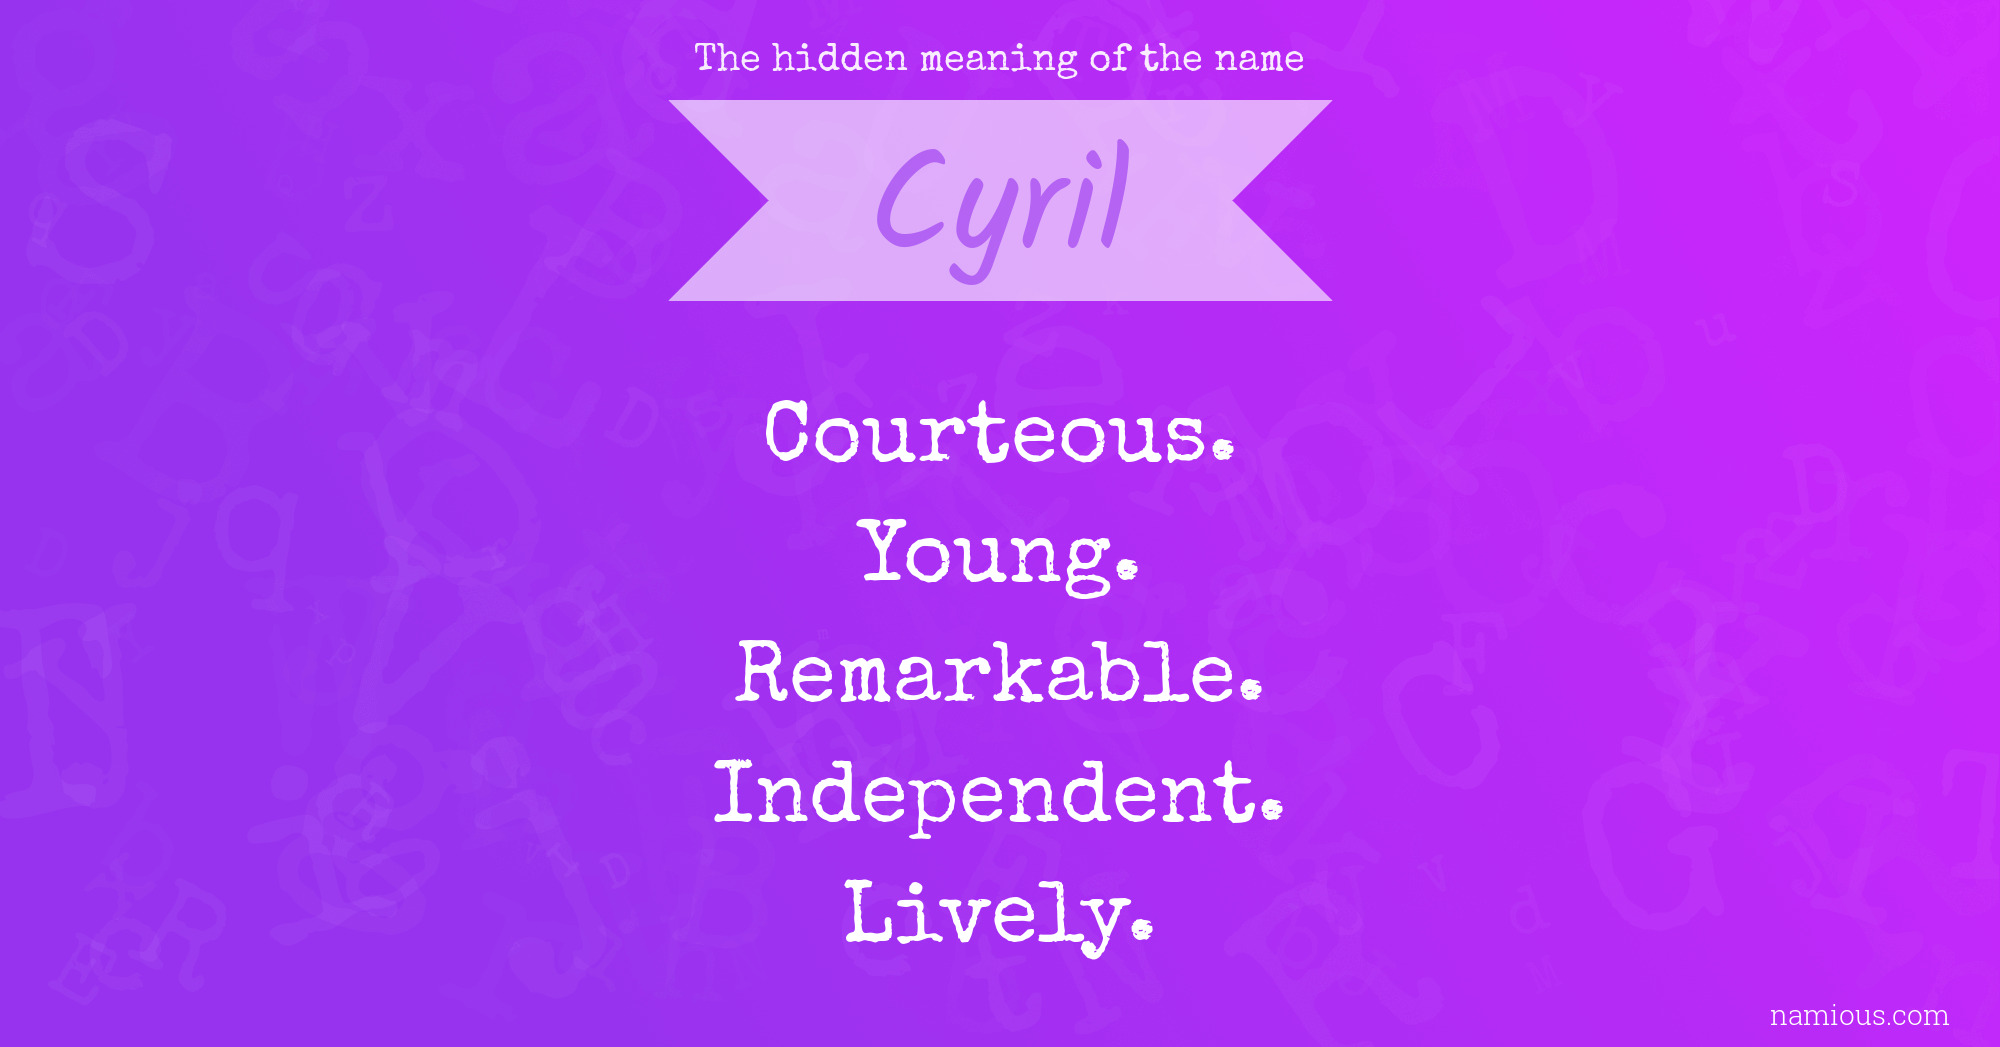 The hidden meaning of the name Cyril